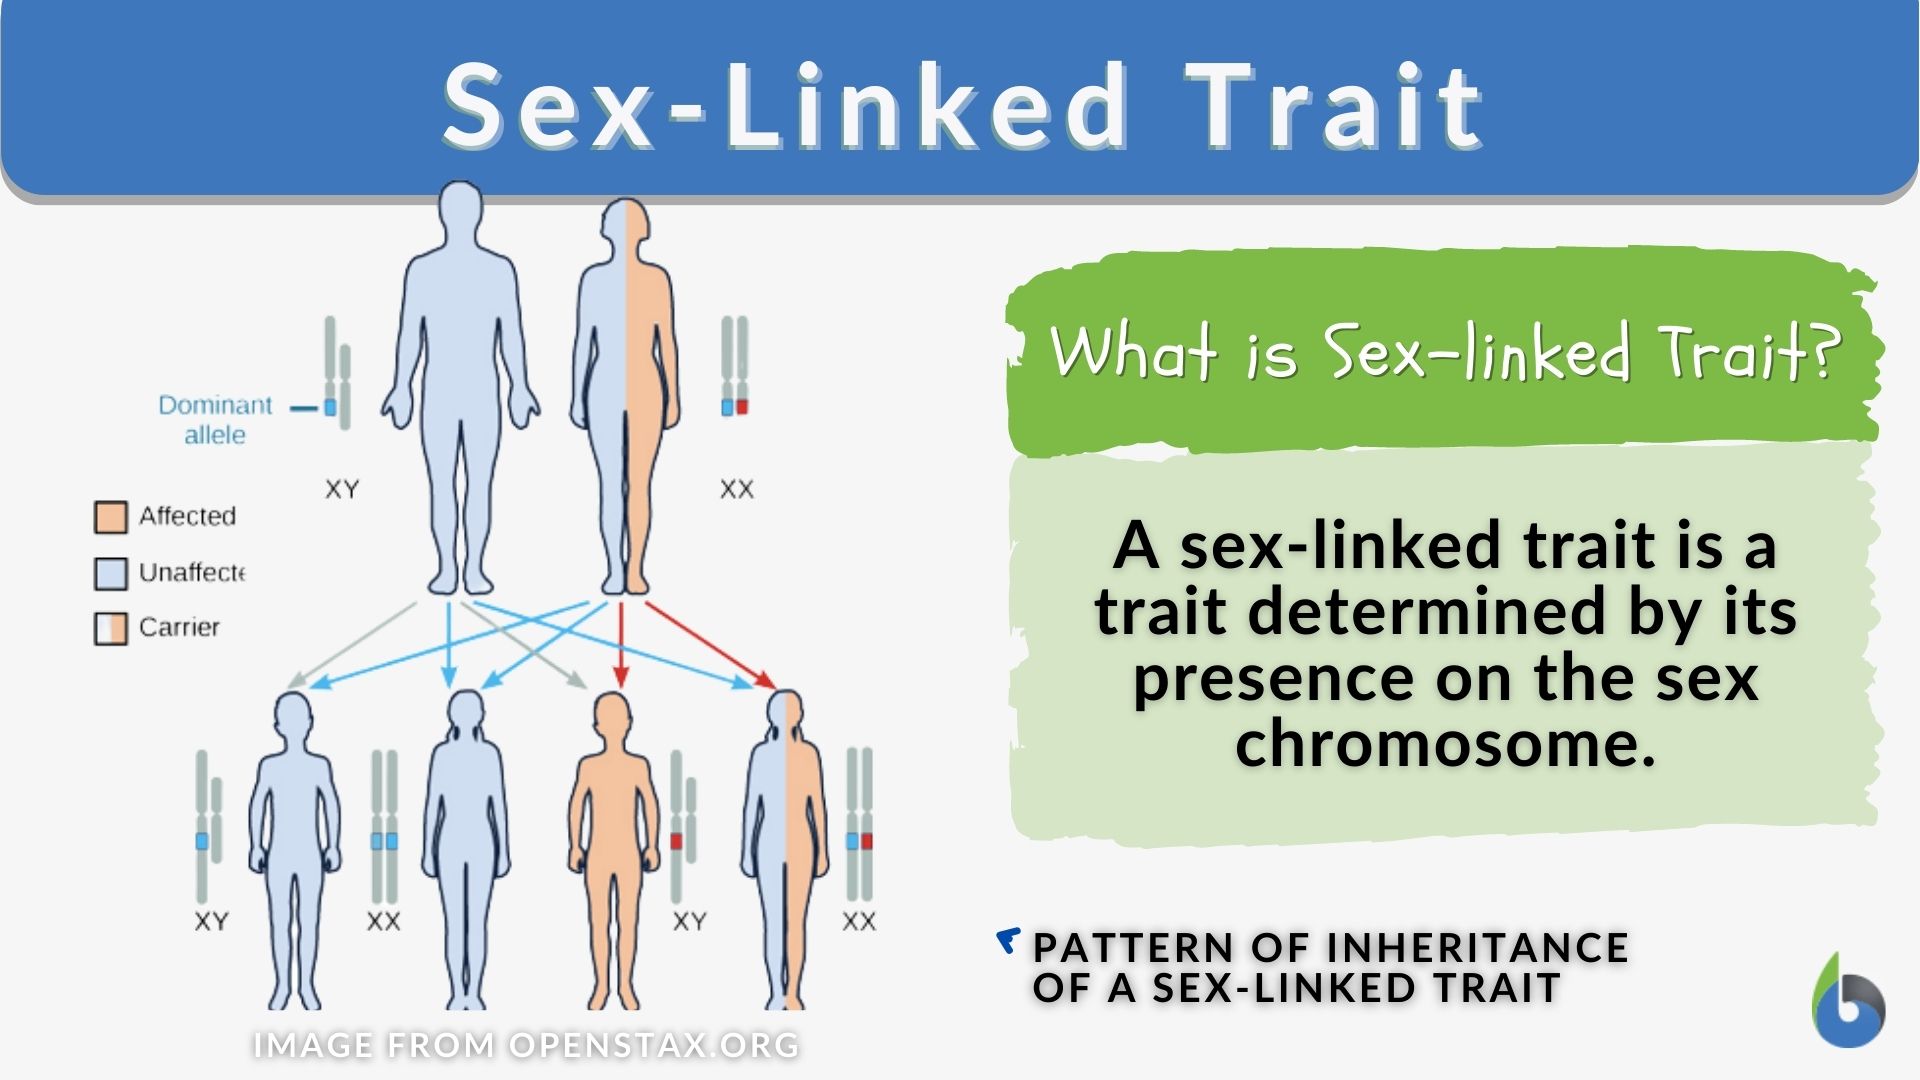 Sex-linked trait - Definition and Examples pic